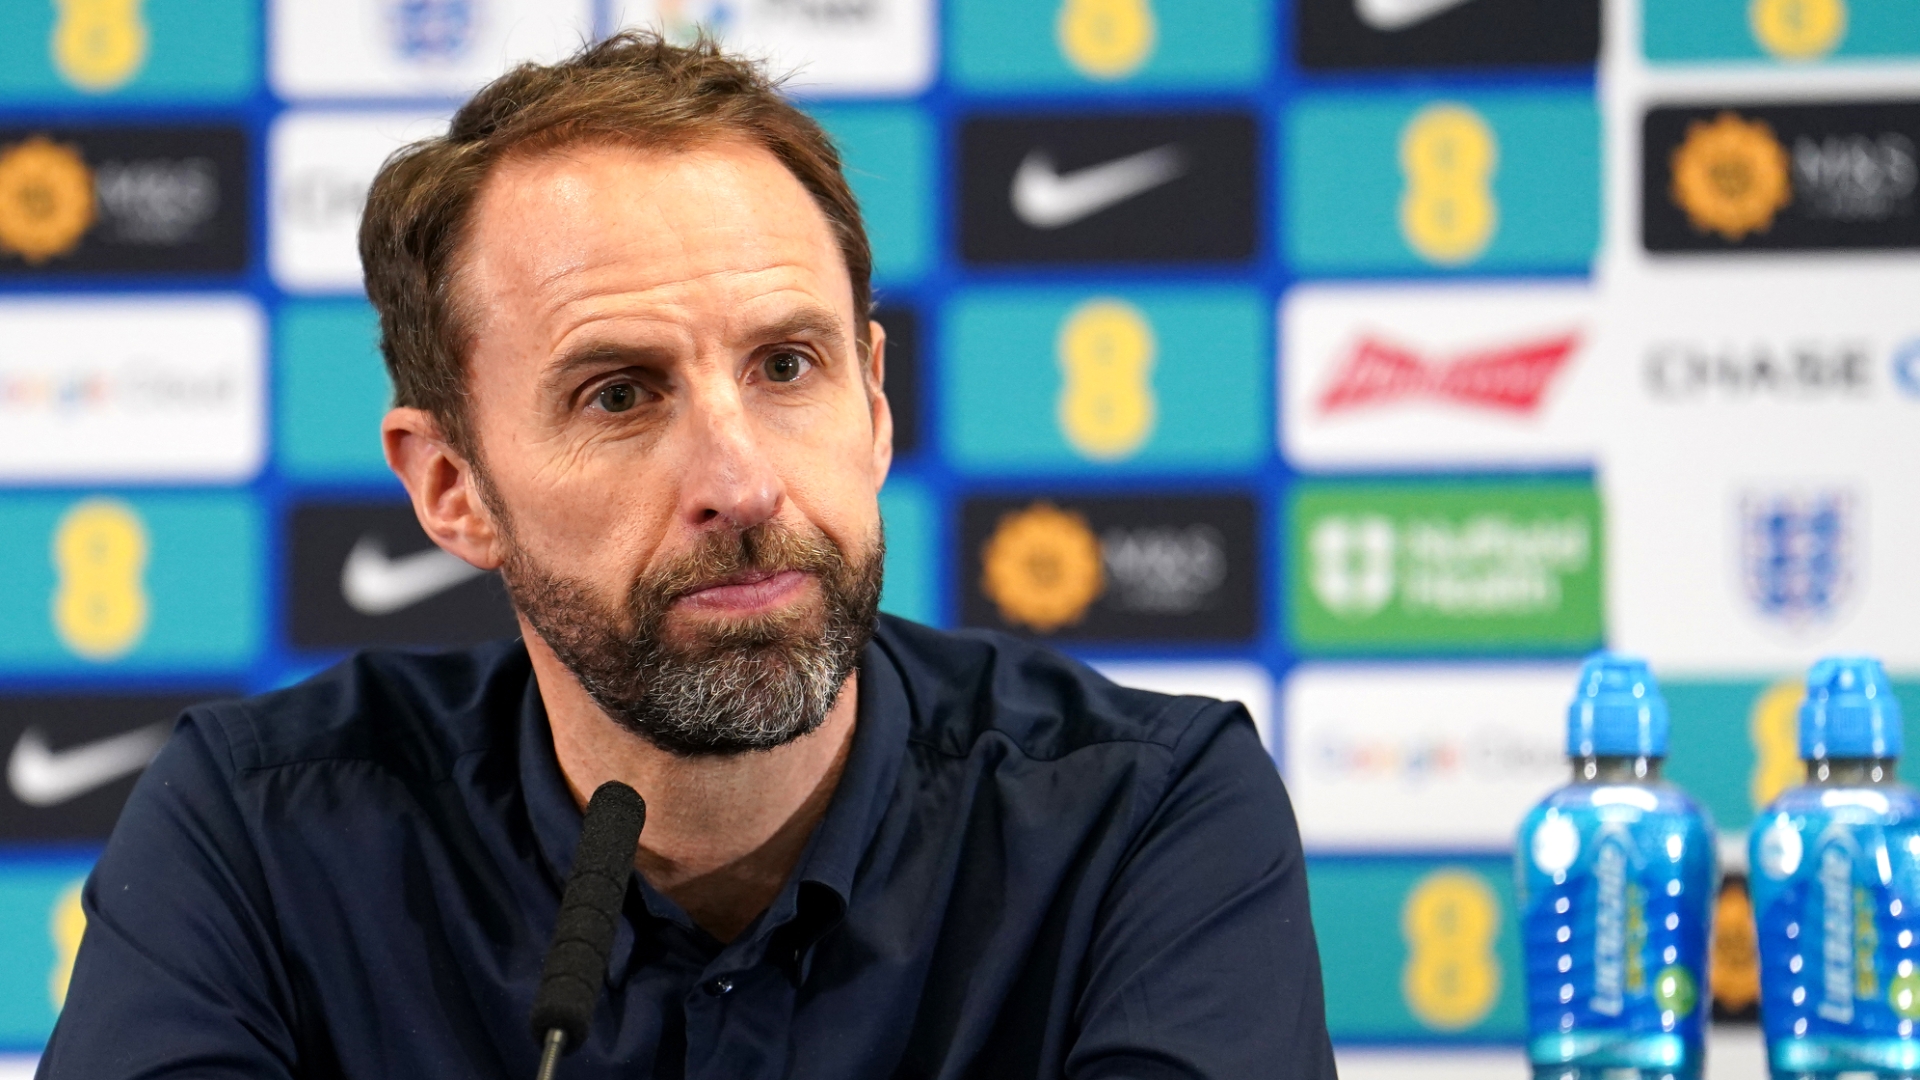 Why has Gareth Southgate moved away his usual squad choice?